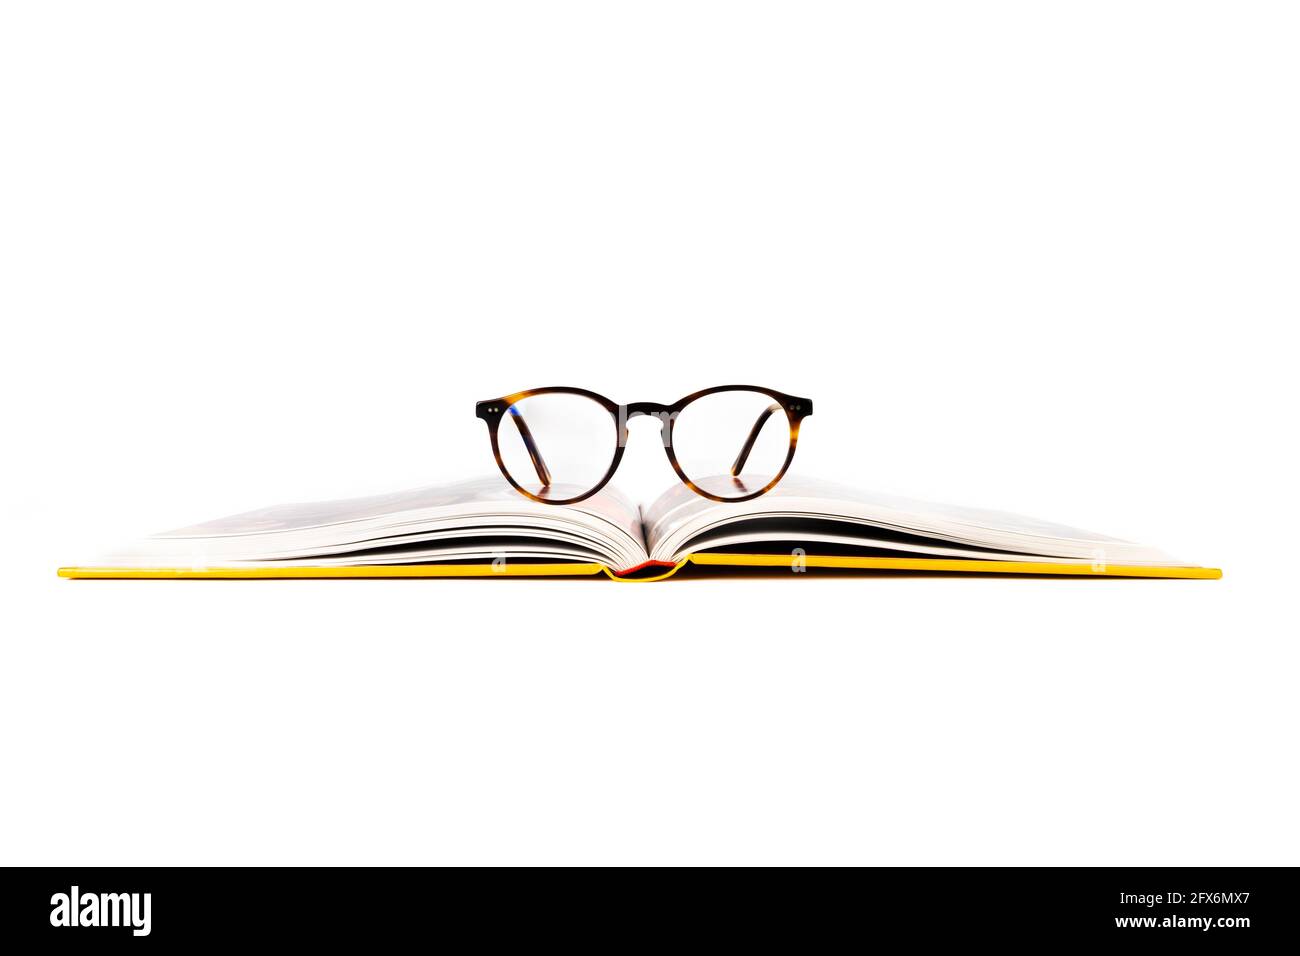 Opened book with reading glasses isolated on white background, front view Stock Photo